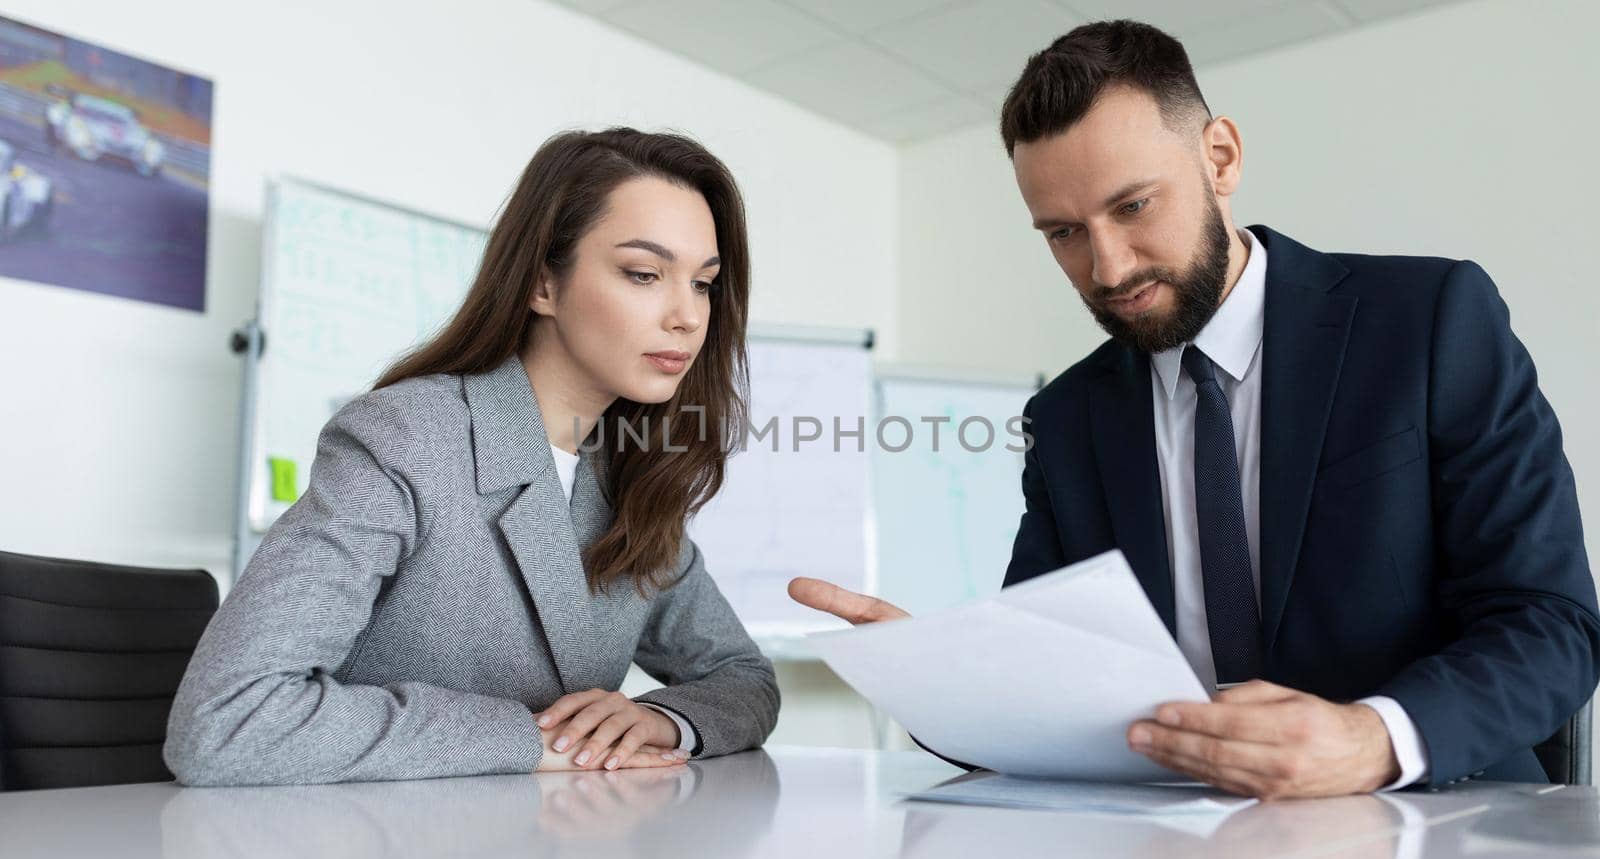 manager reads a report to his subordinate in the office.